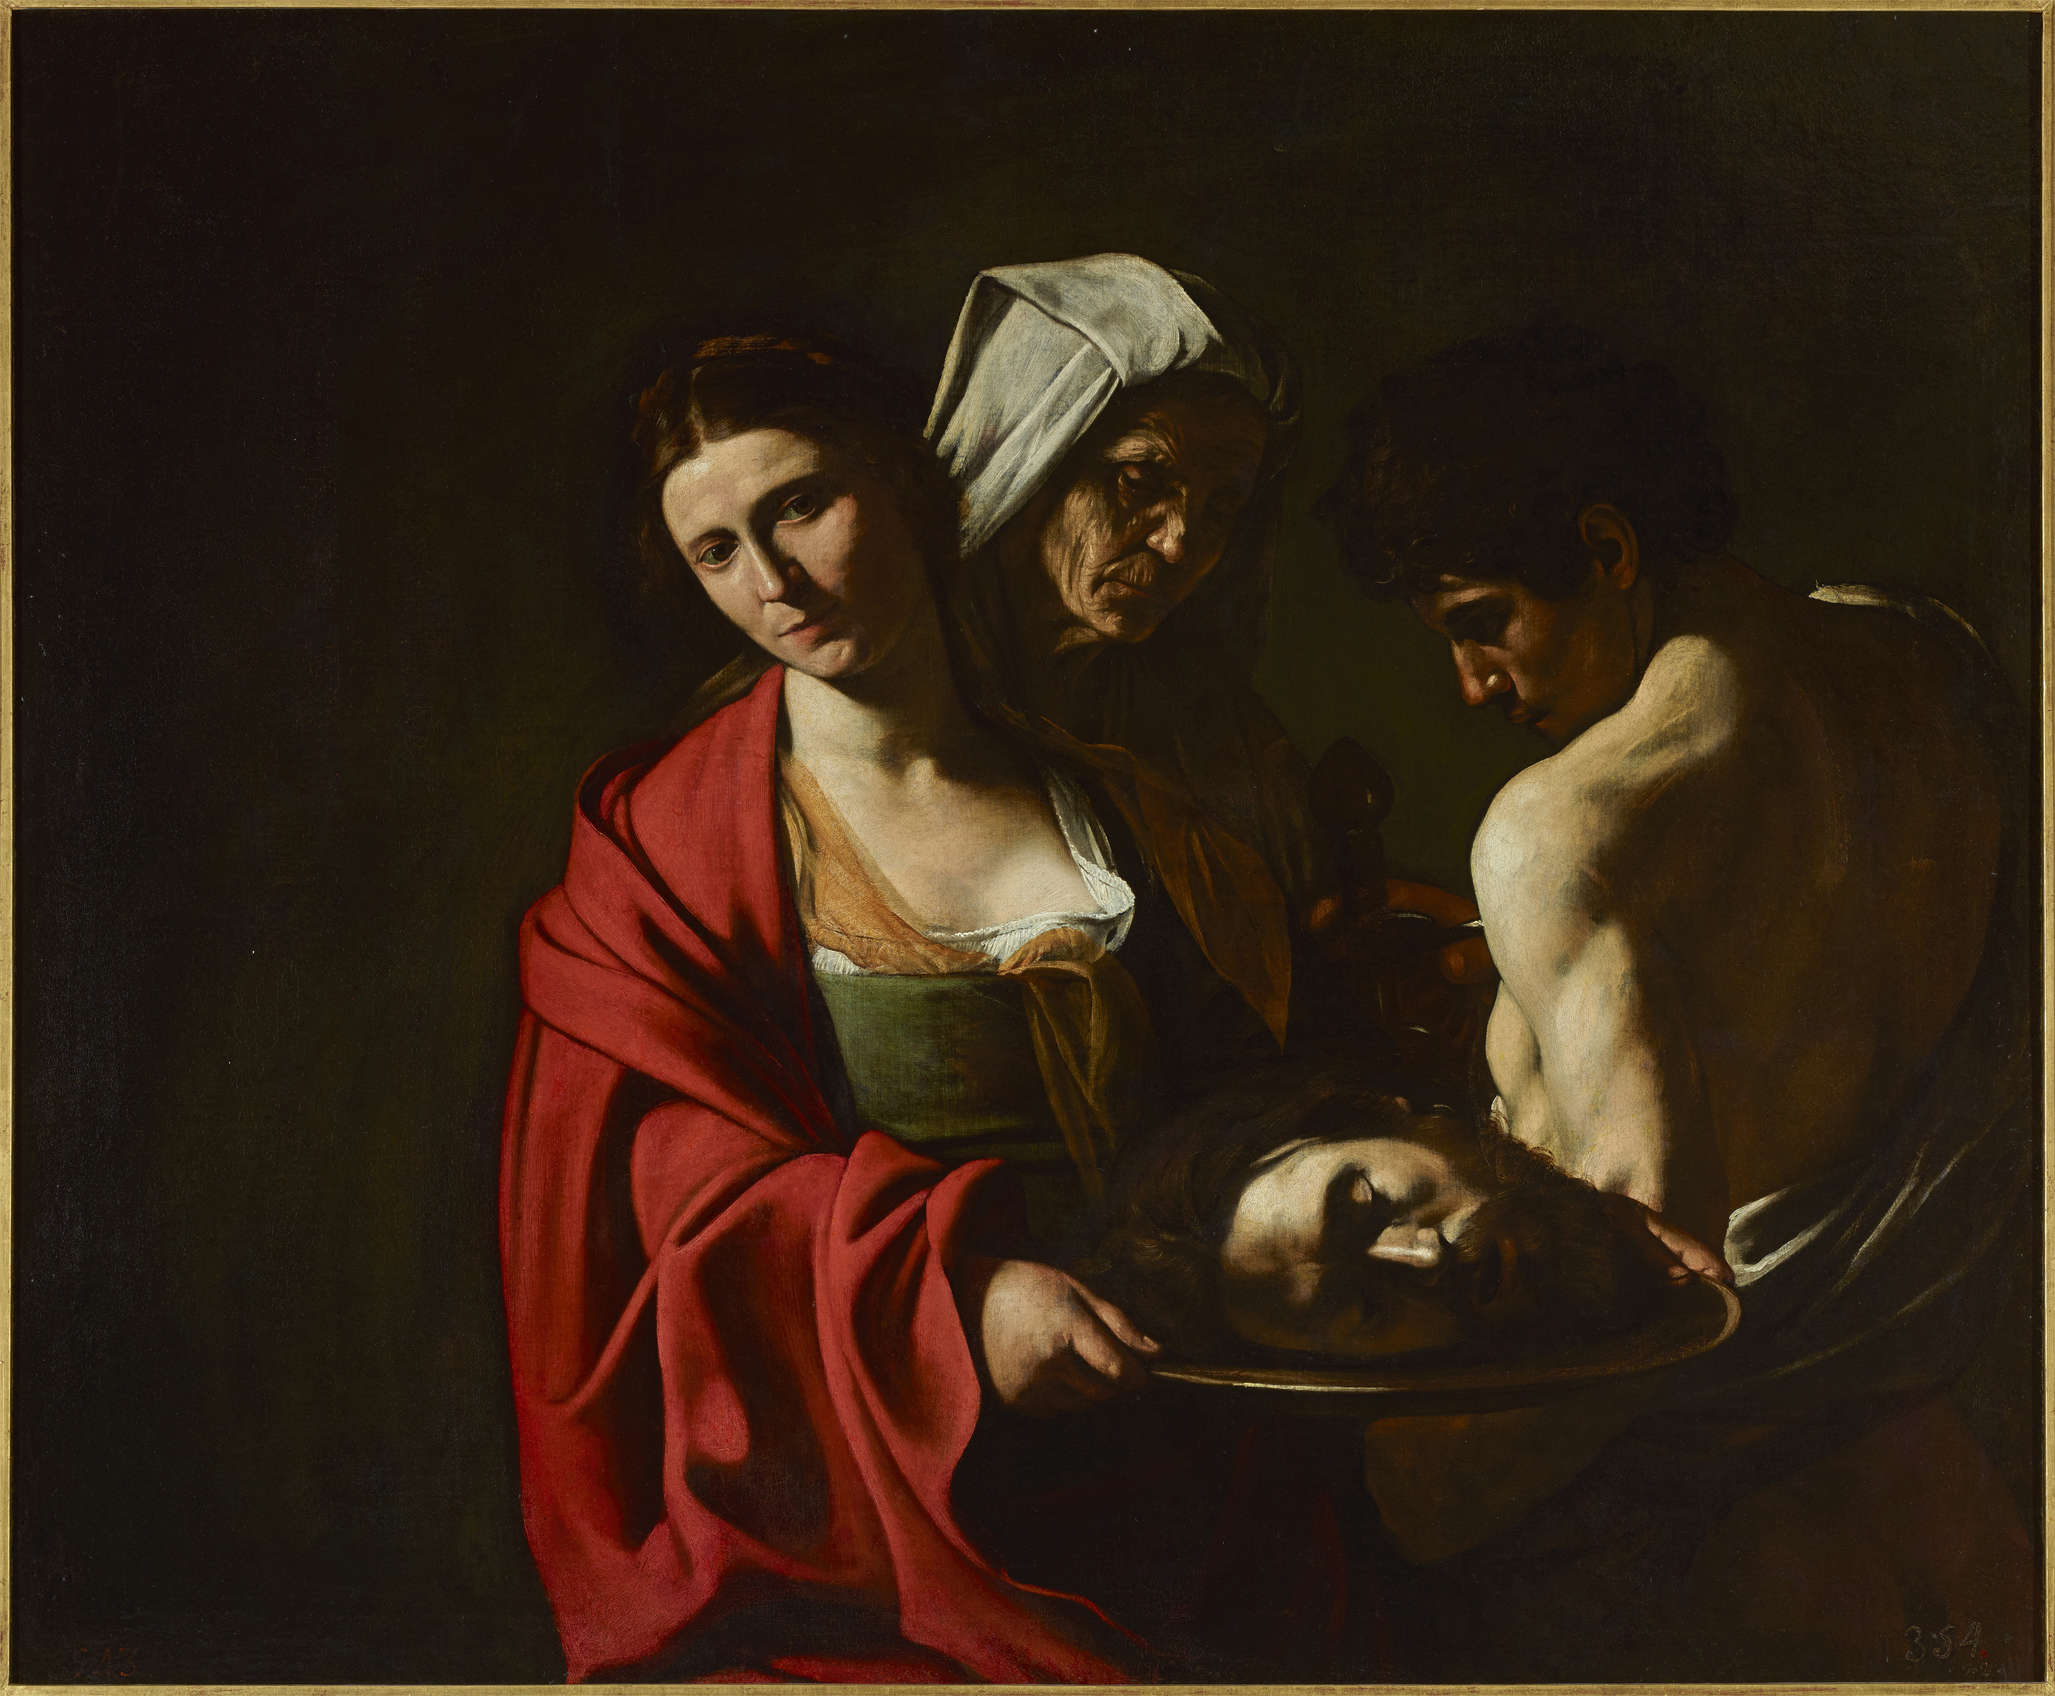 Caravaggio, Salome with the Head of the Baptist (1606-1607; oil on canvas, 116 x 140 cm; Madrid, Royal Collections Gallery)